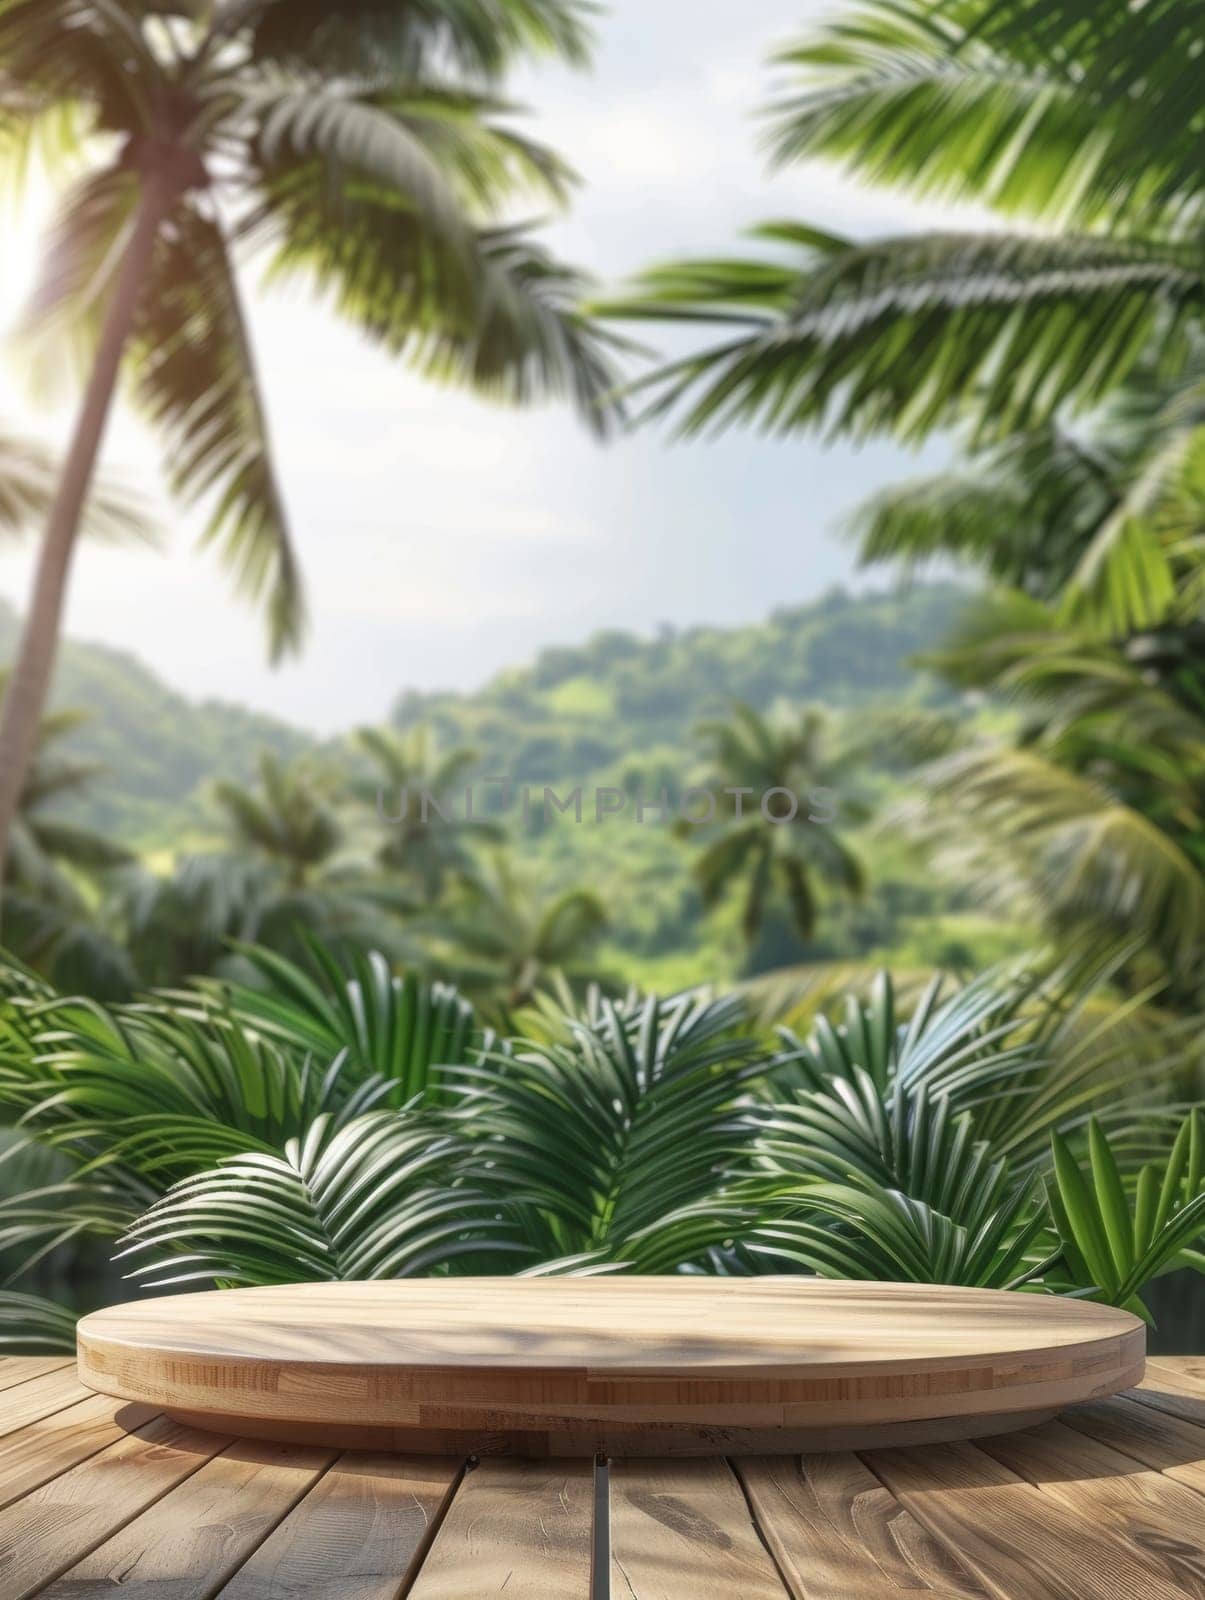 A circular wooden podium stands on a wooden deck, overlooking a breathtaking ocean view framed by towering palm trees, creating a serene and inviting setting